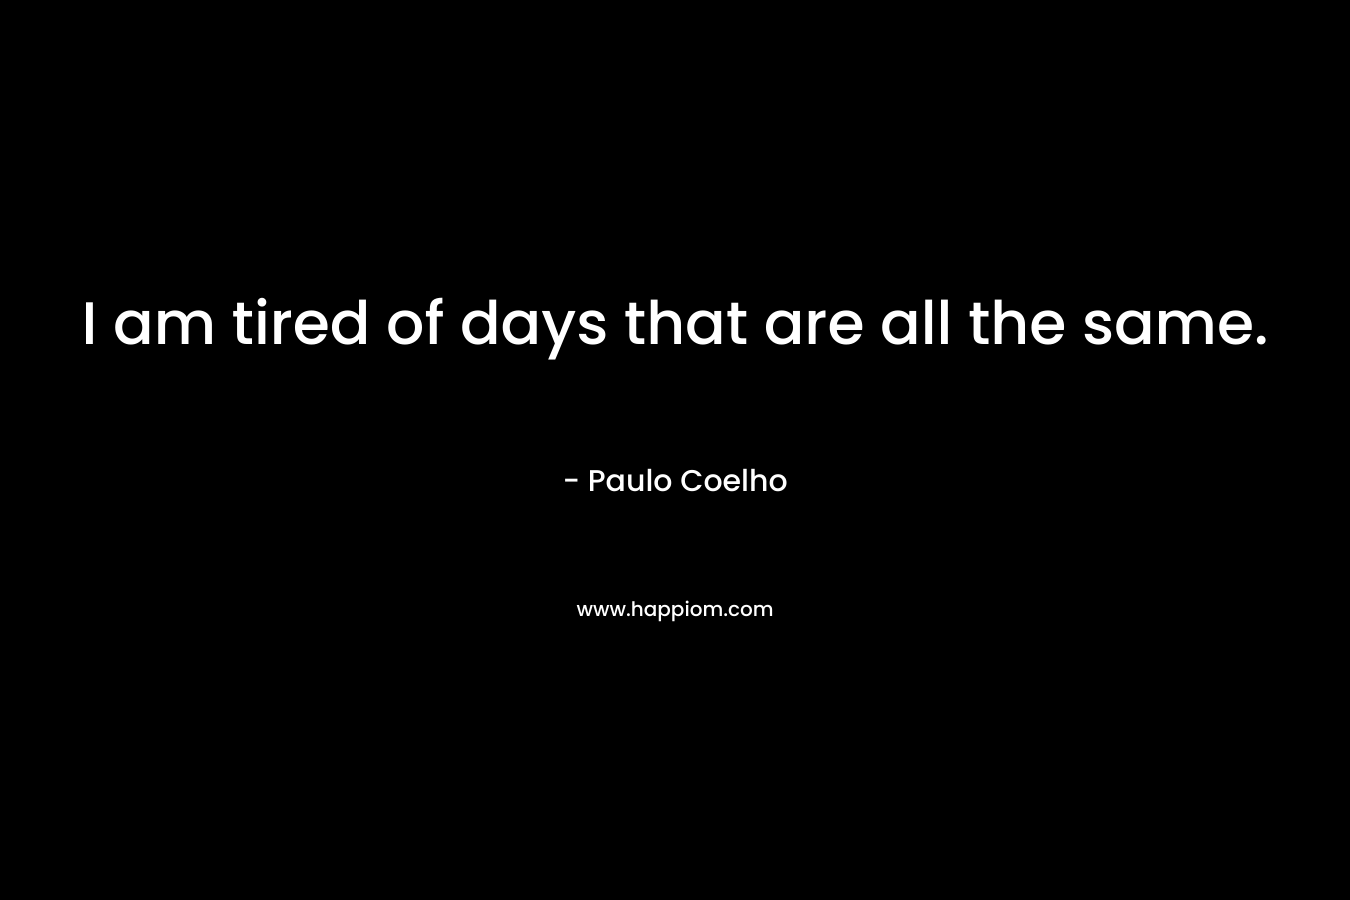 I am tired of days that are all the same.